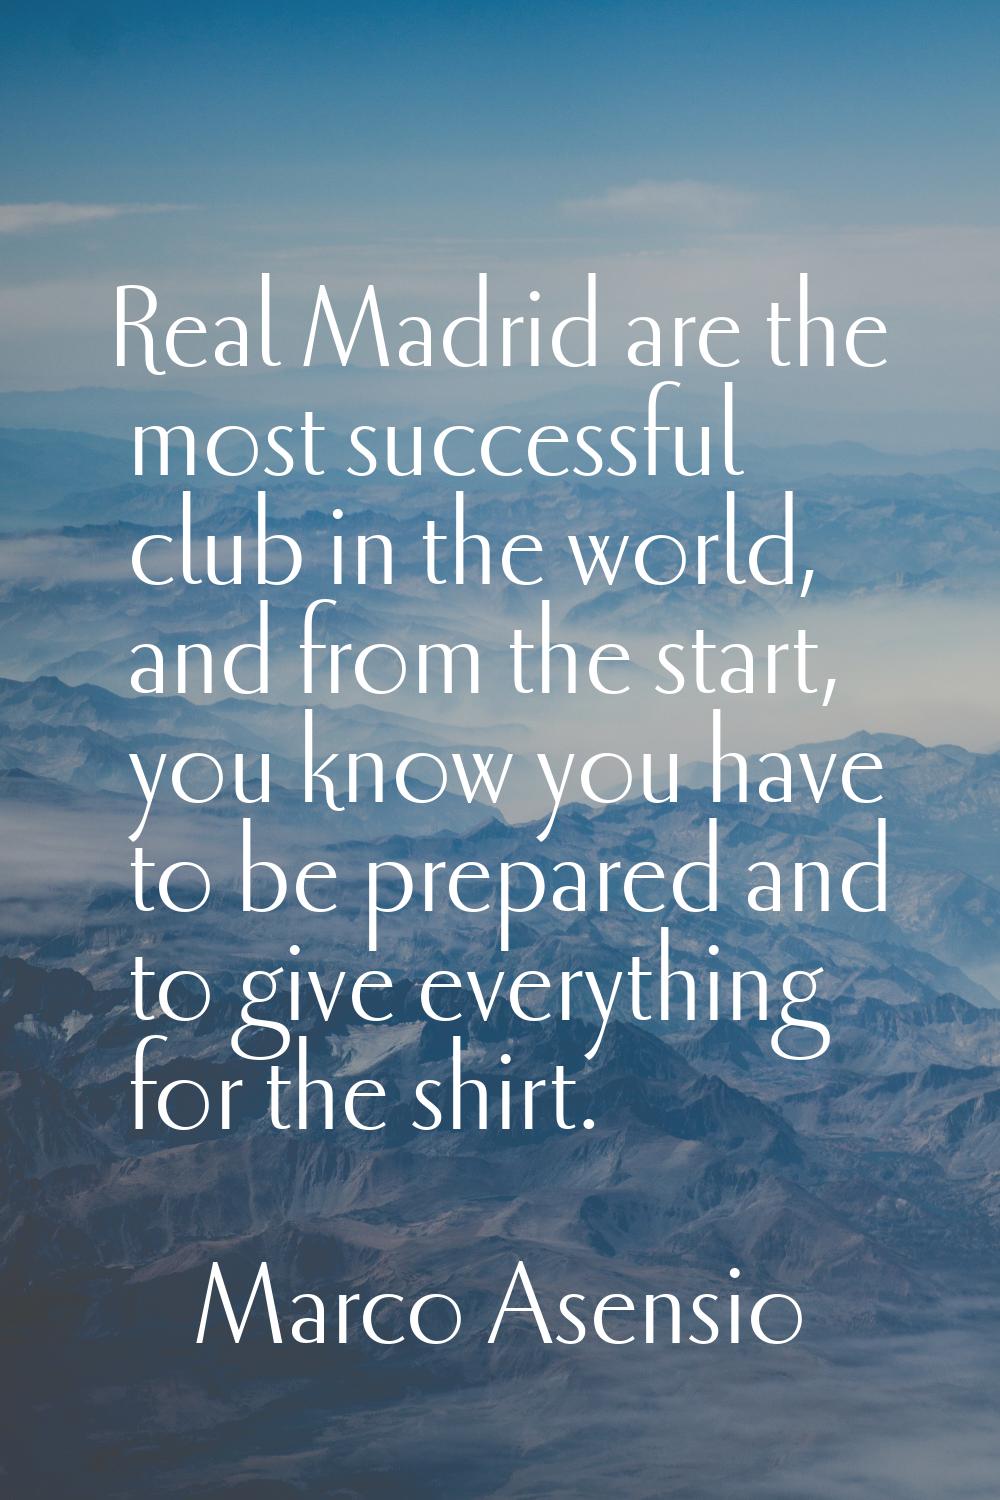 Real Madrid are the most successful club in the world, and from the start, you know you have to be 